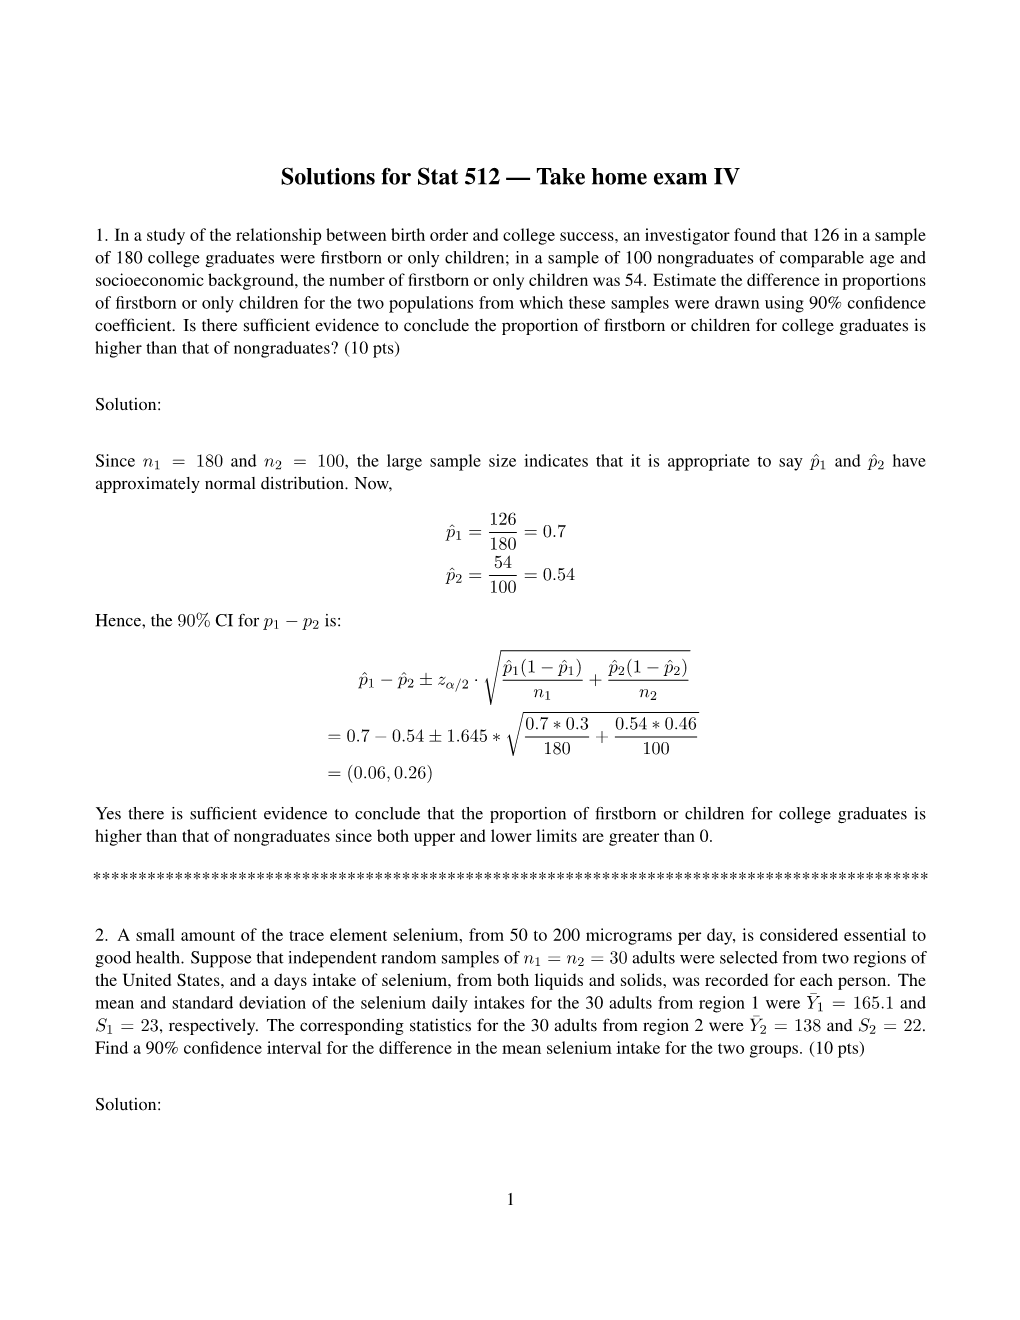 Solutions for Stat 512 — Take Home Exam IV